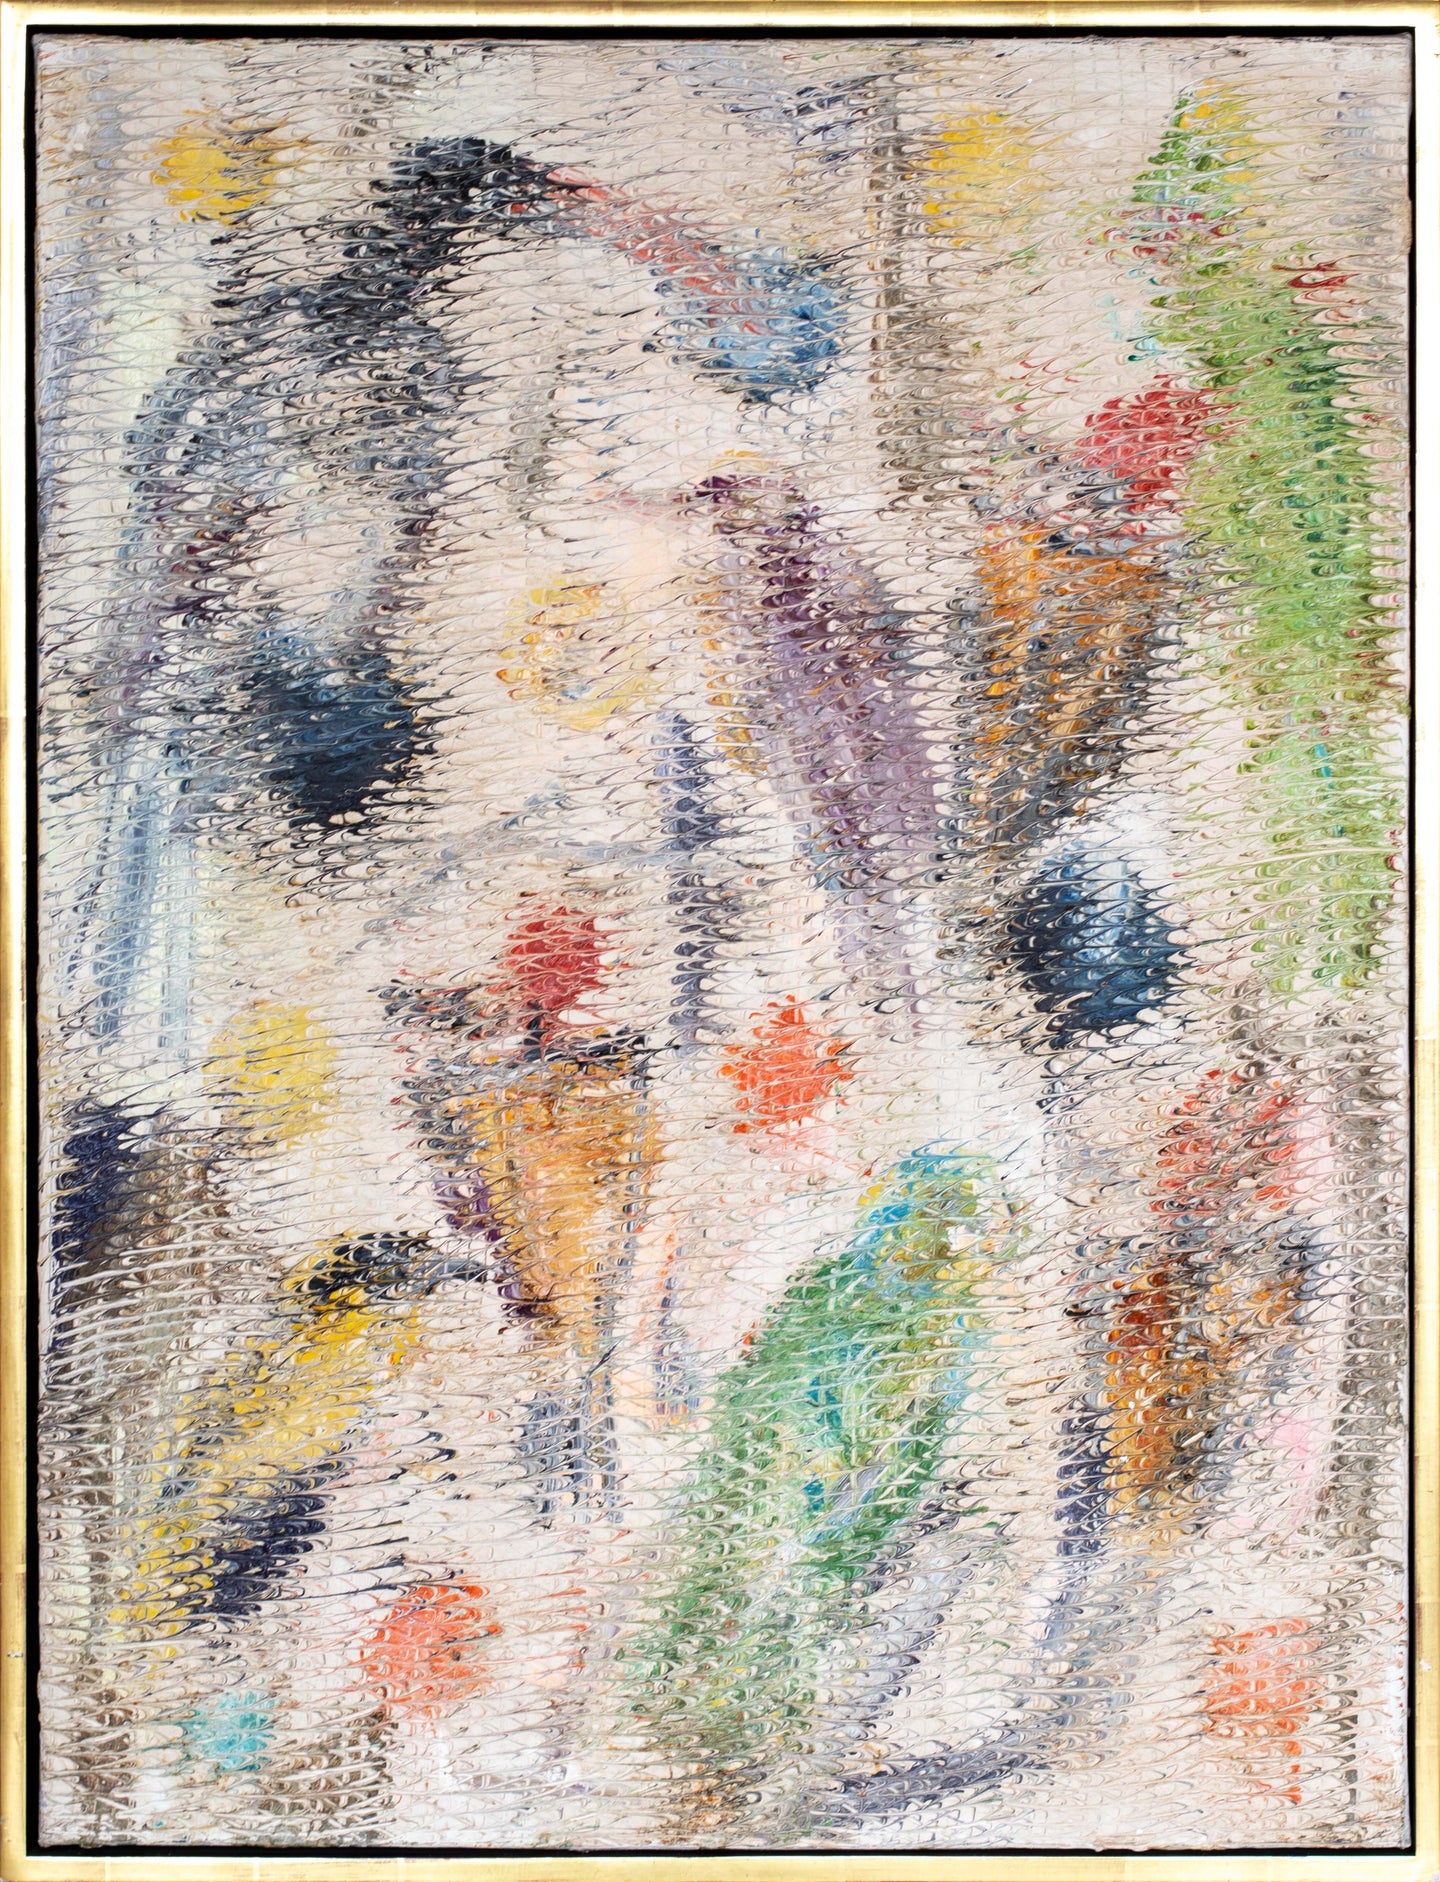 Hunt Slonem, Picul 5, 1989, Oil painting on canvas, 40x30 inches